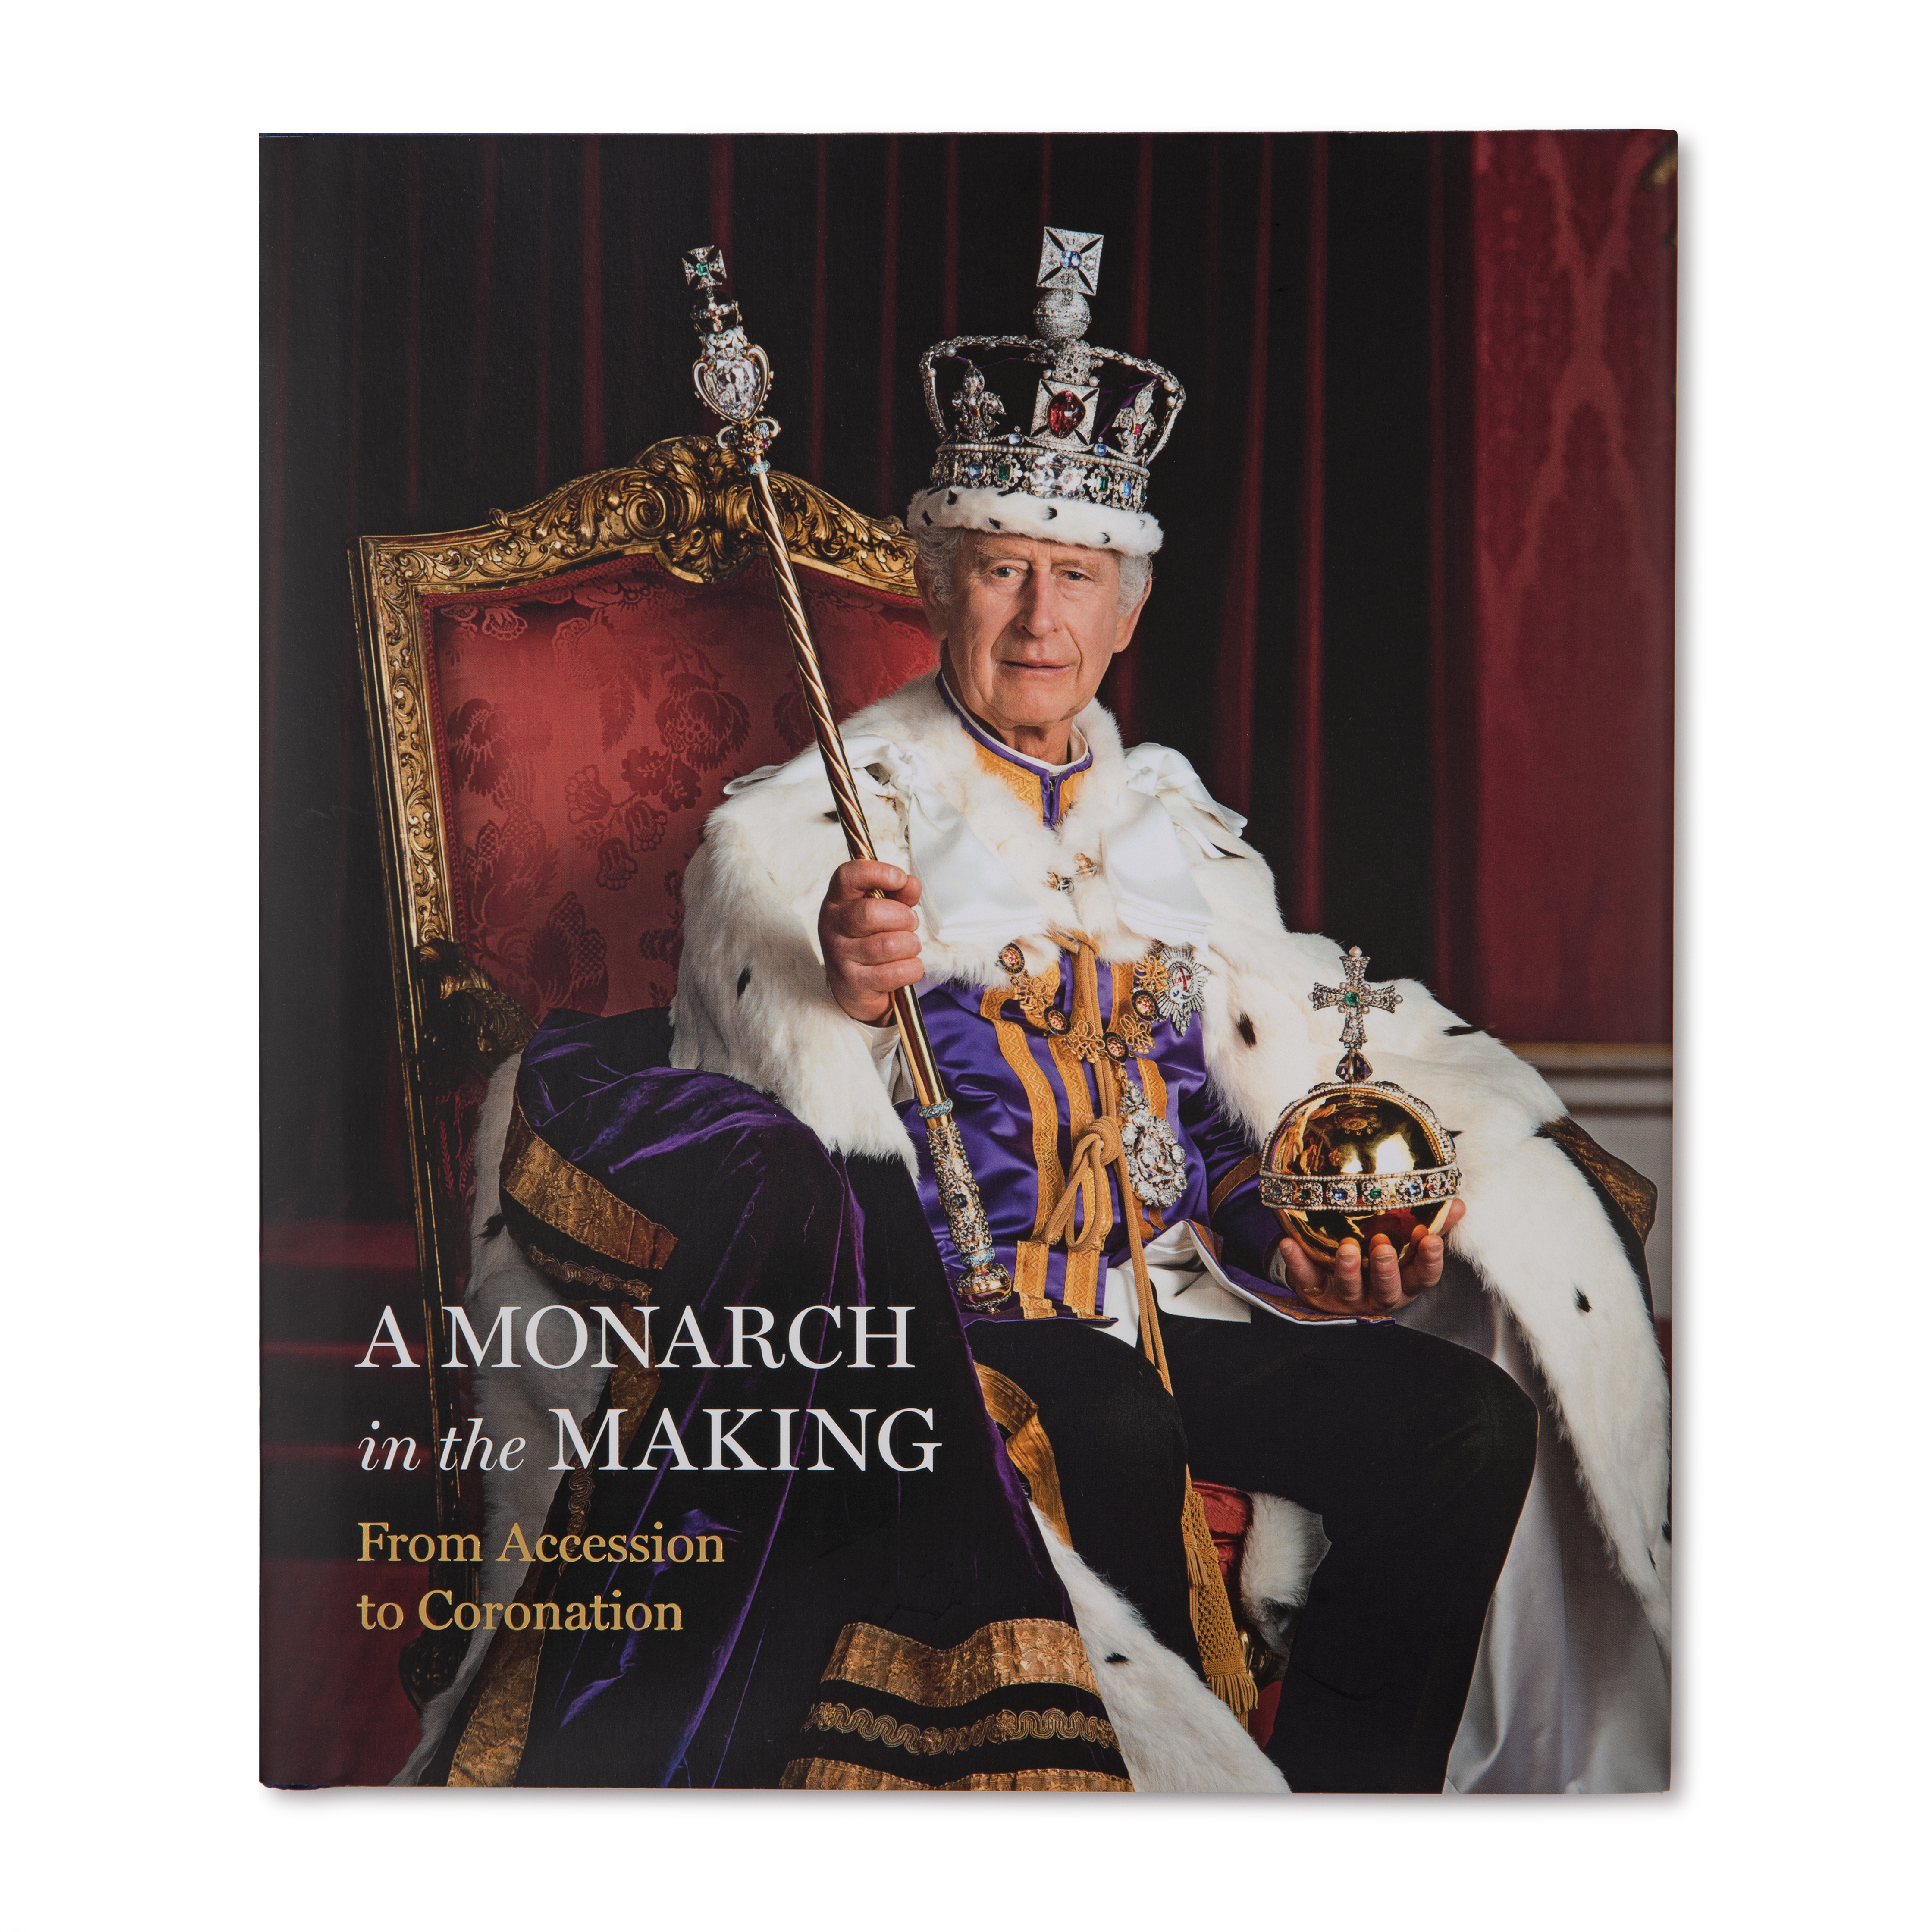 The front cover of the book 'A Monarch in the Making: From Accession to Coronation' featuring King Charles III on the throne